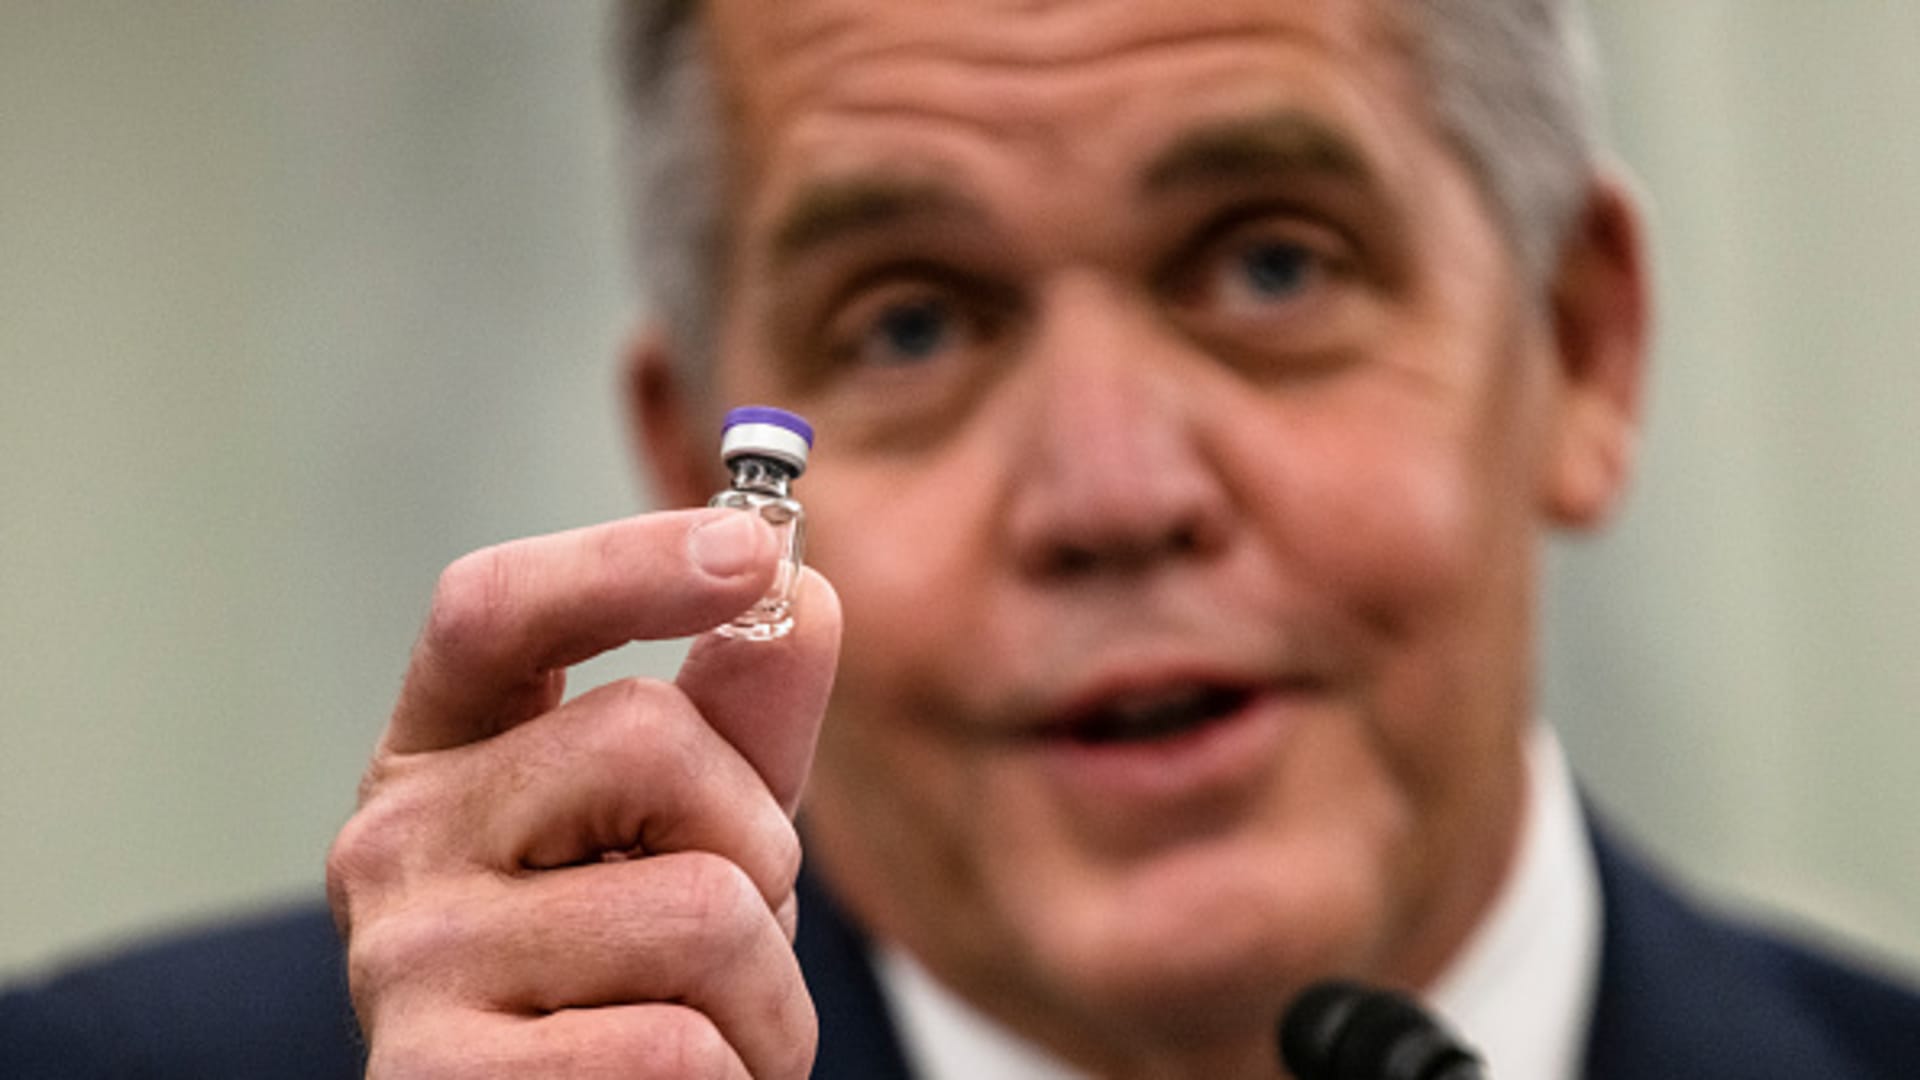 Wesley Wheeler, President of Global Healthcare at United Parcel Service (UPS), holds up a sample of the vial that will be used to transport the Pfizer COVID-19 vaccine as he testifies during a Senate Commerce, Science, and Transportation Subcommittee hearing on the logistics of transporting a COVID-19 vaccine on December 10, 2020 in Washington, DC.